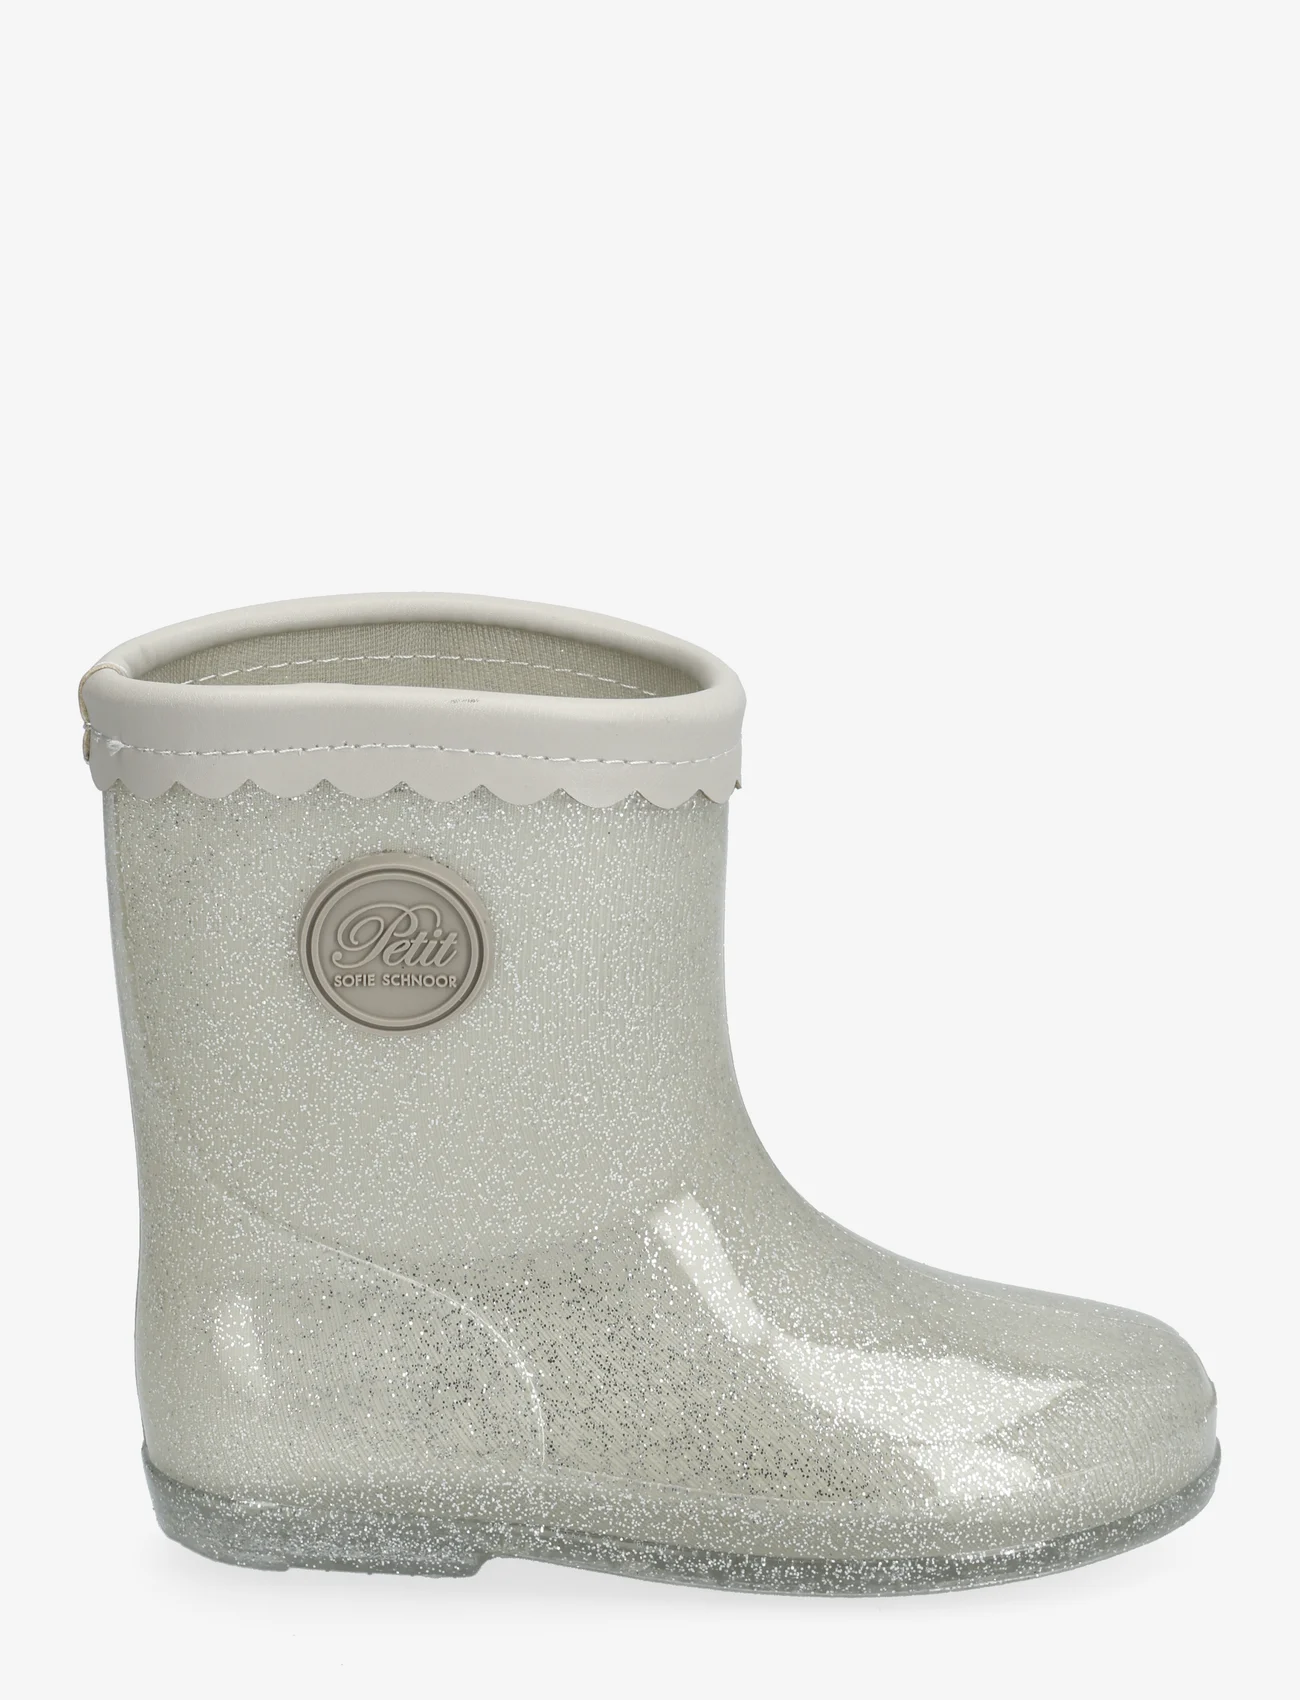 Sofie Schnoor Baby and Kids - Rubber boot - unlined rubberboots - silver - 1